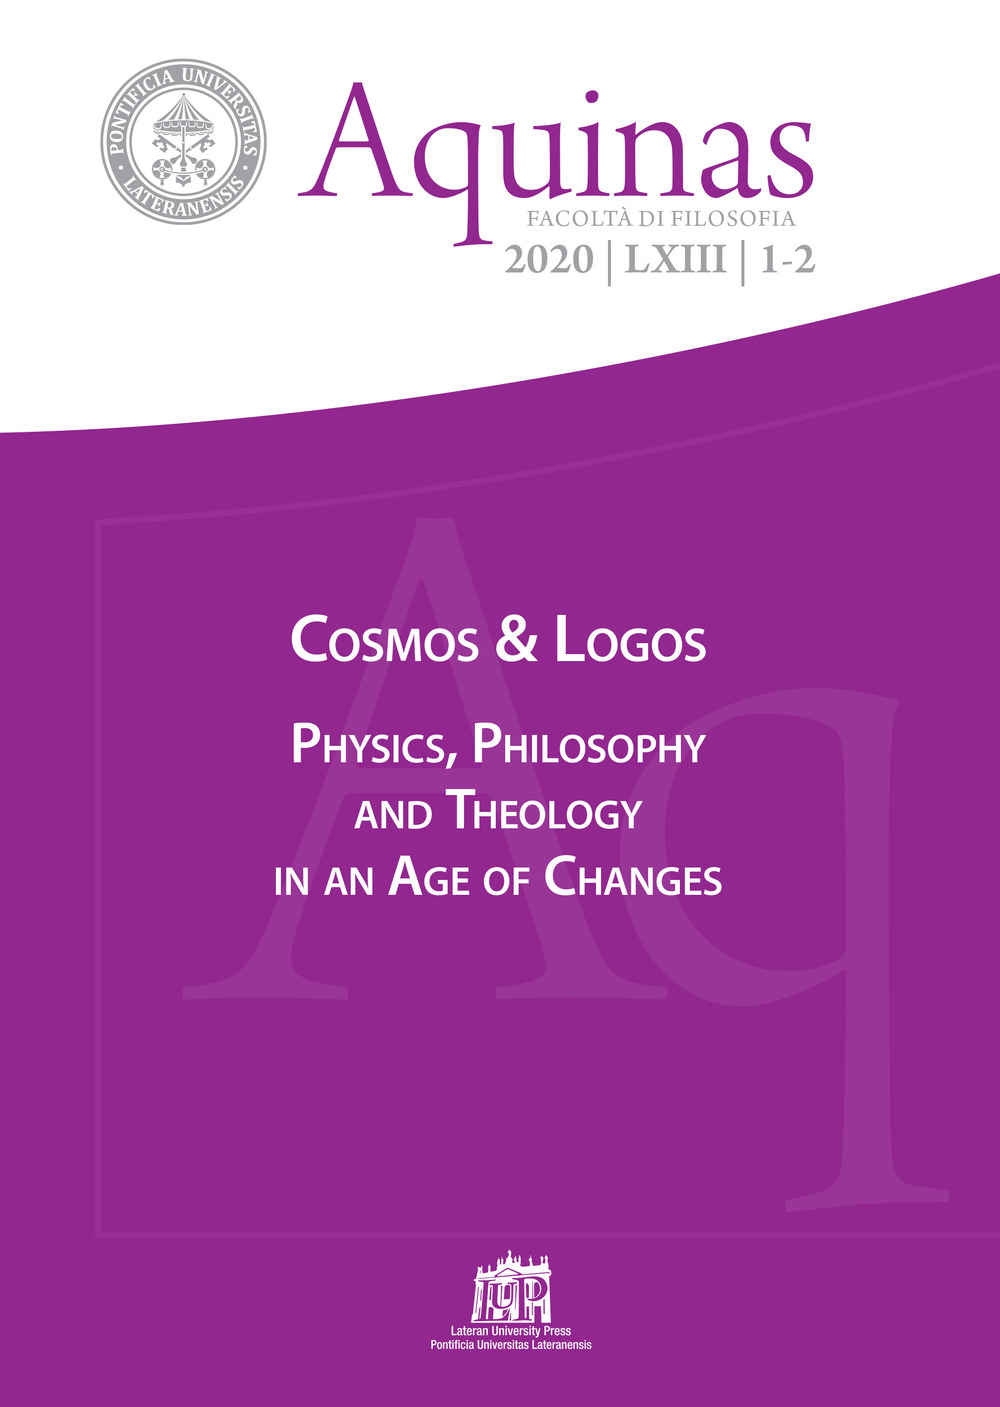 Aquinas. Rivista internazionale di filosofia (2020). Vol. 1-2: Cosmos & Logos. Physics, philosophy and theology in an age of changes